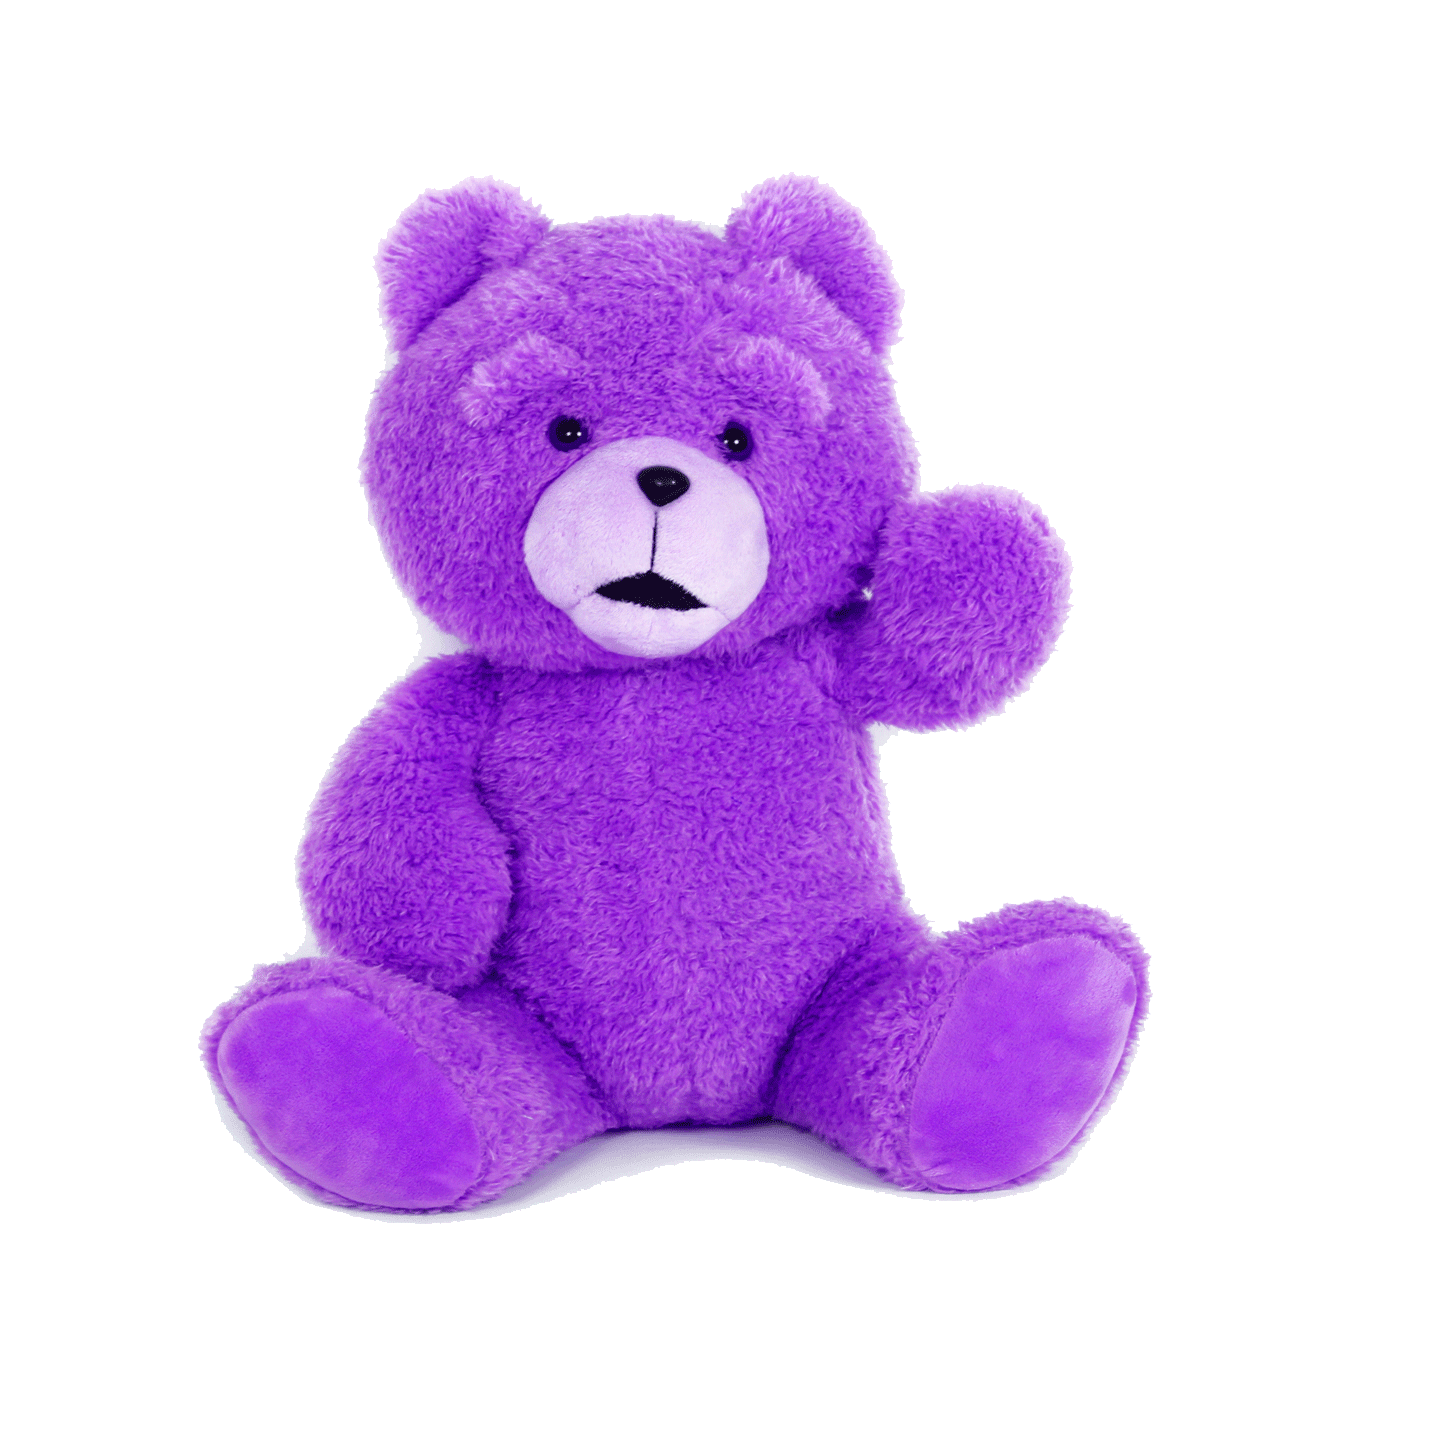 Teddy Bear Images Wallpaper Pictures Pics Download - Transparent Teddy Bear Png , HD Wallpaper & Backgrounds